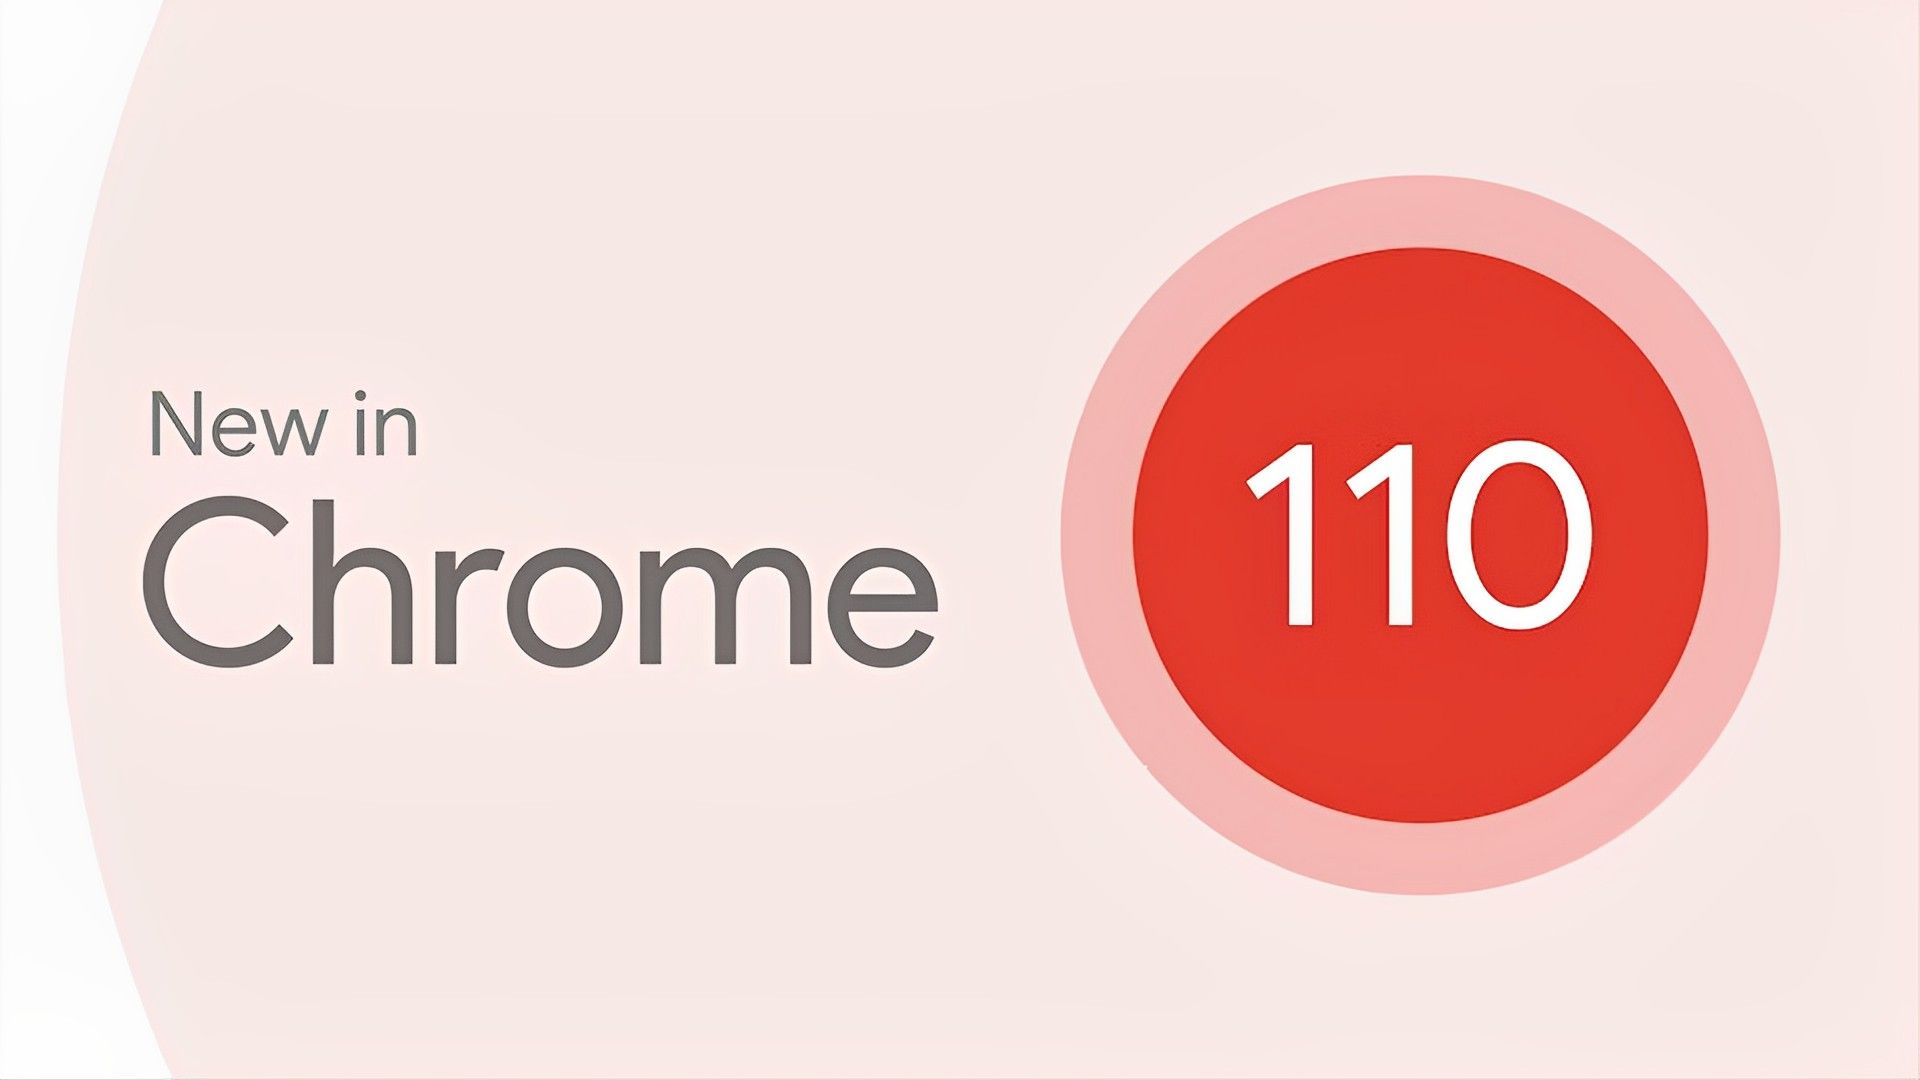 What is new in Chrome 110?